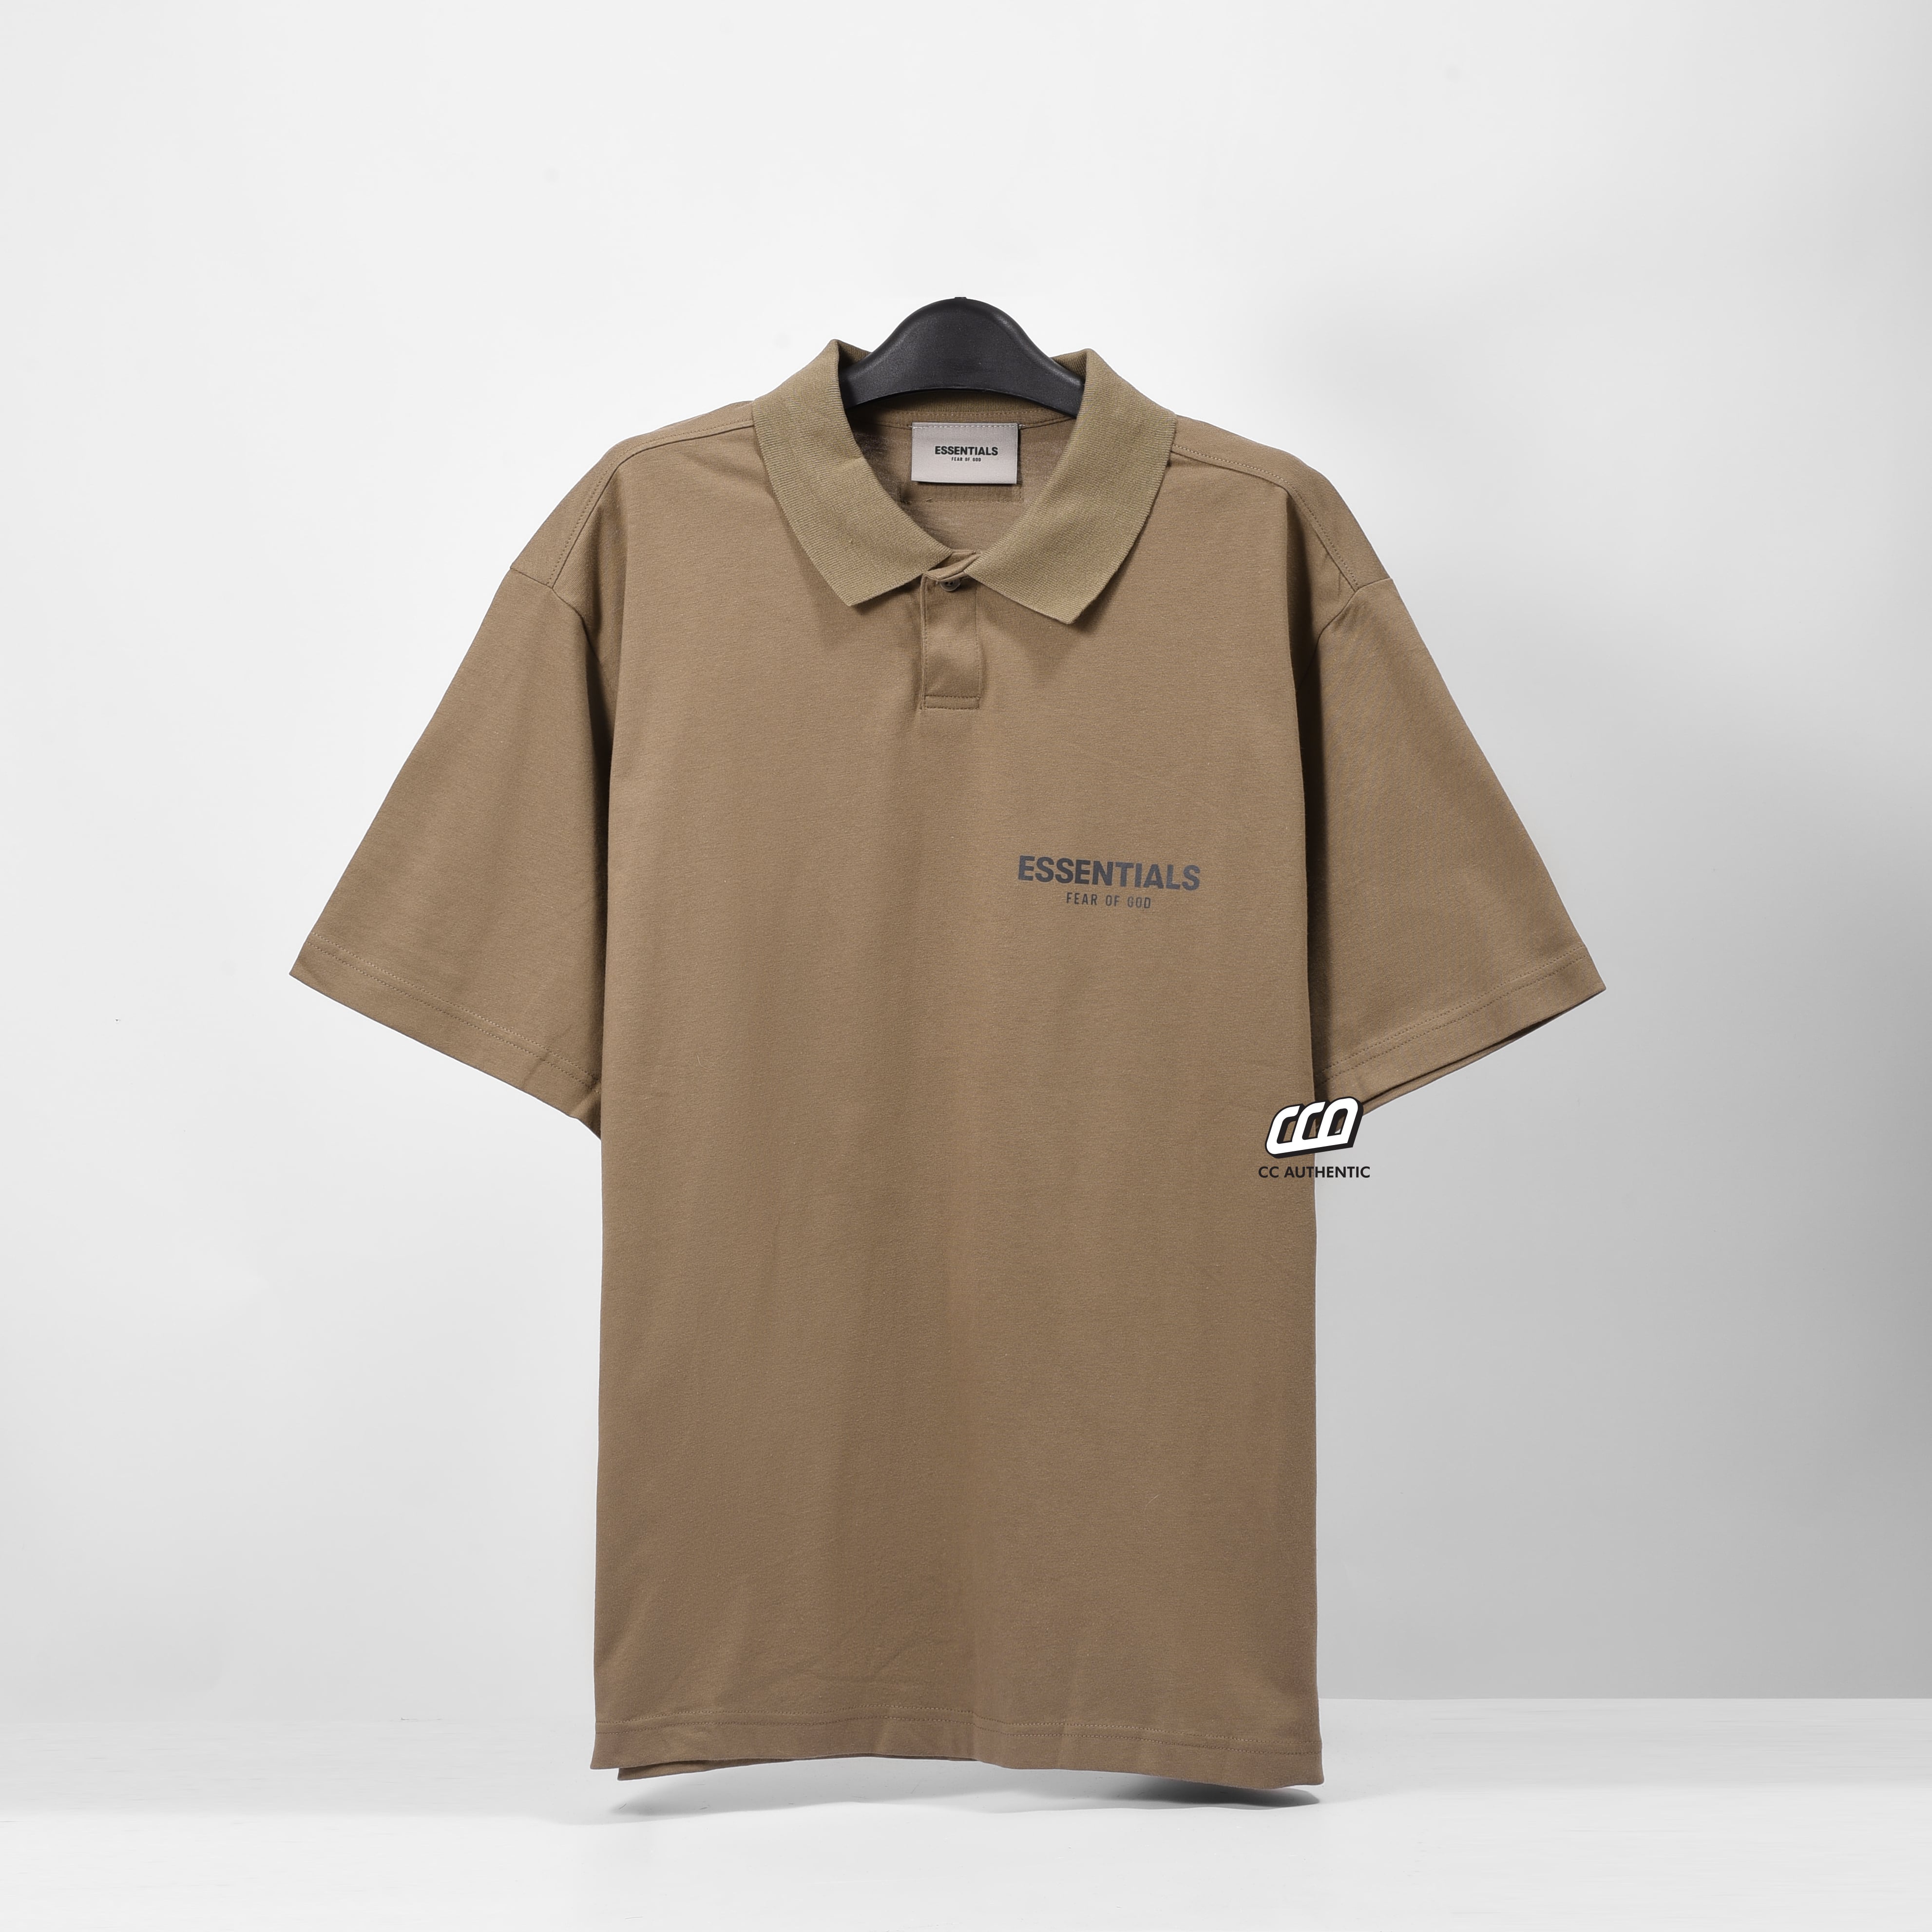 FEAR OF GOD ESSENTIALS Polo 2021 - harvest